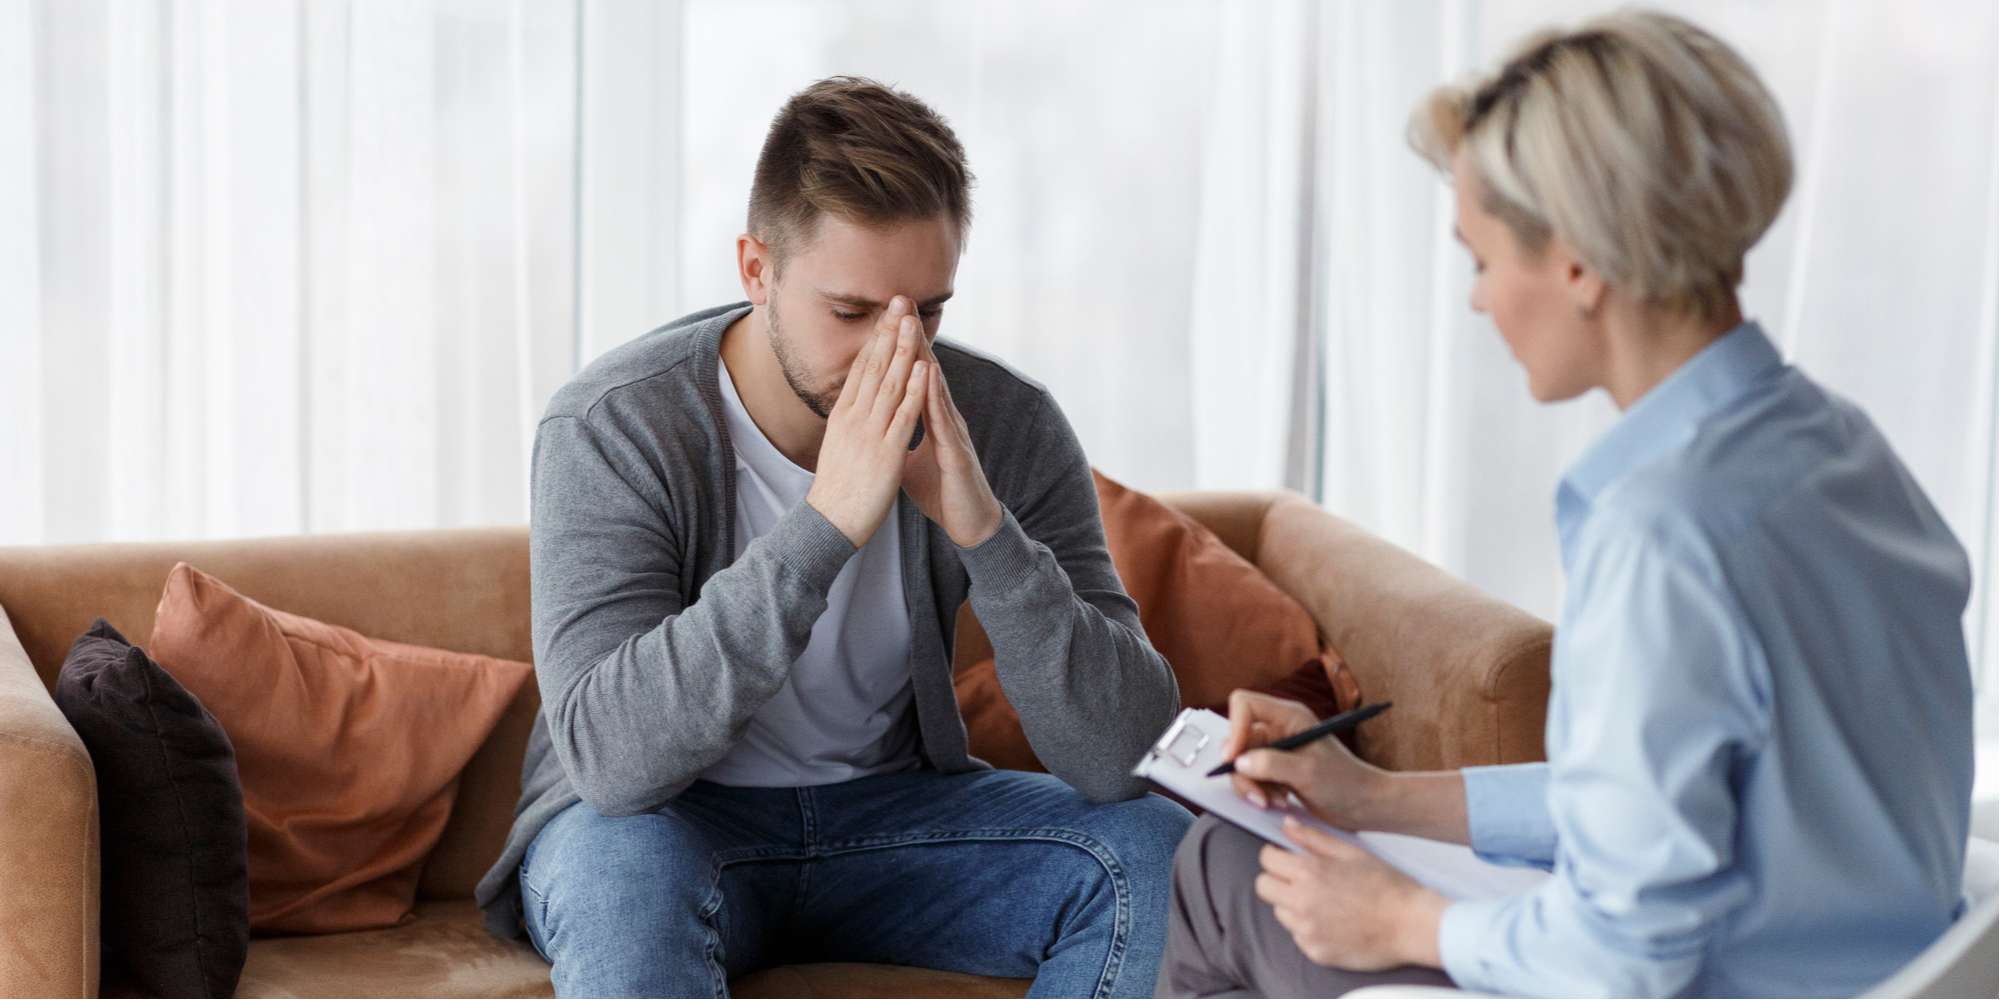 Finding Residential Treatment Centers for Depression